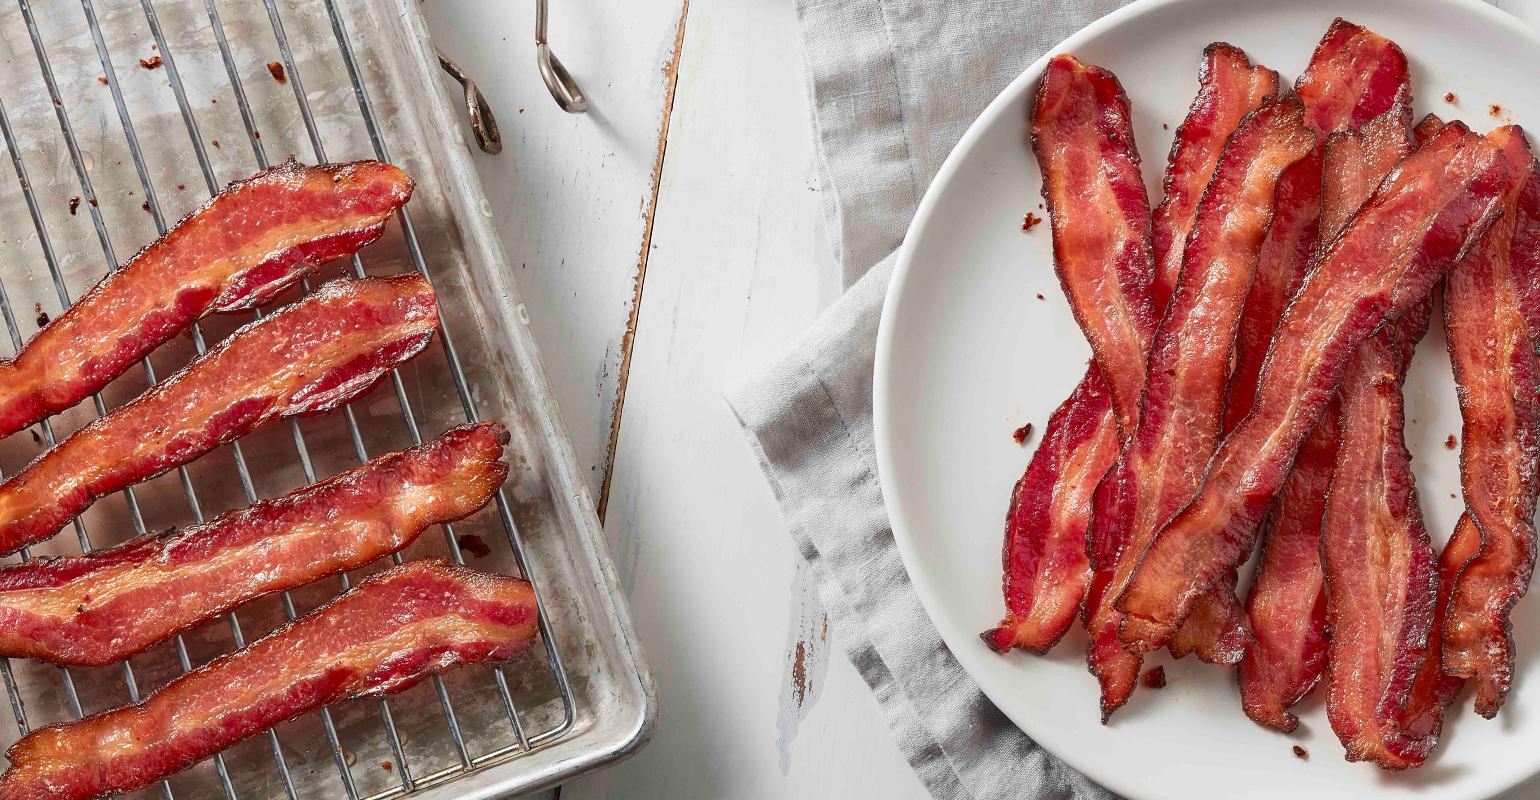 How To Store Cooked Bacon In The Fridge